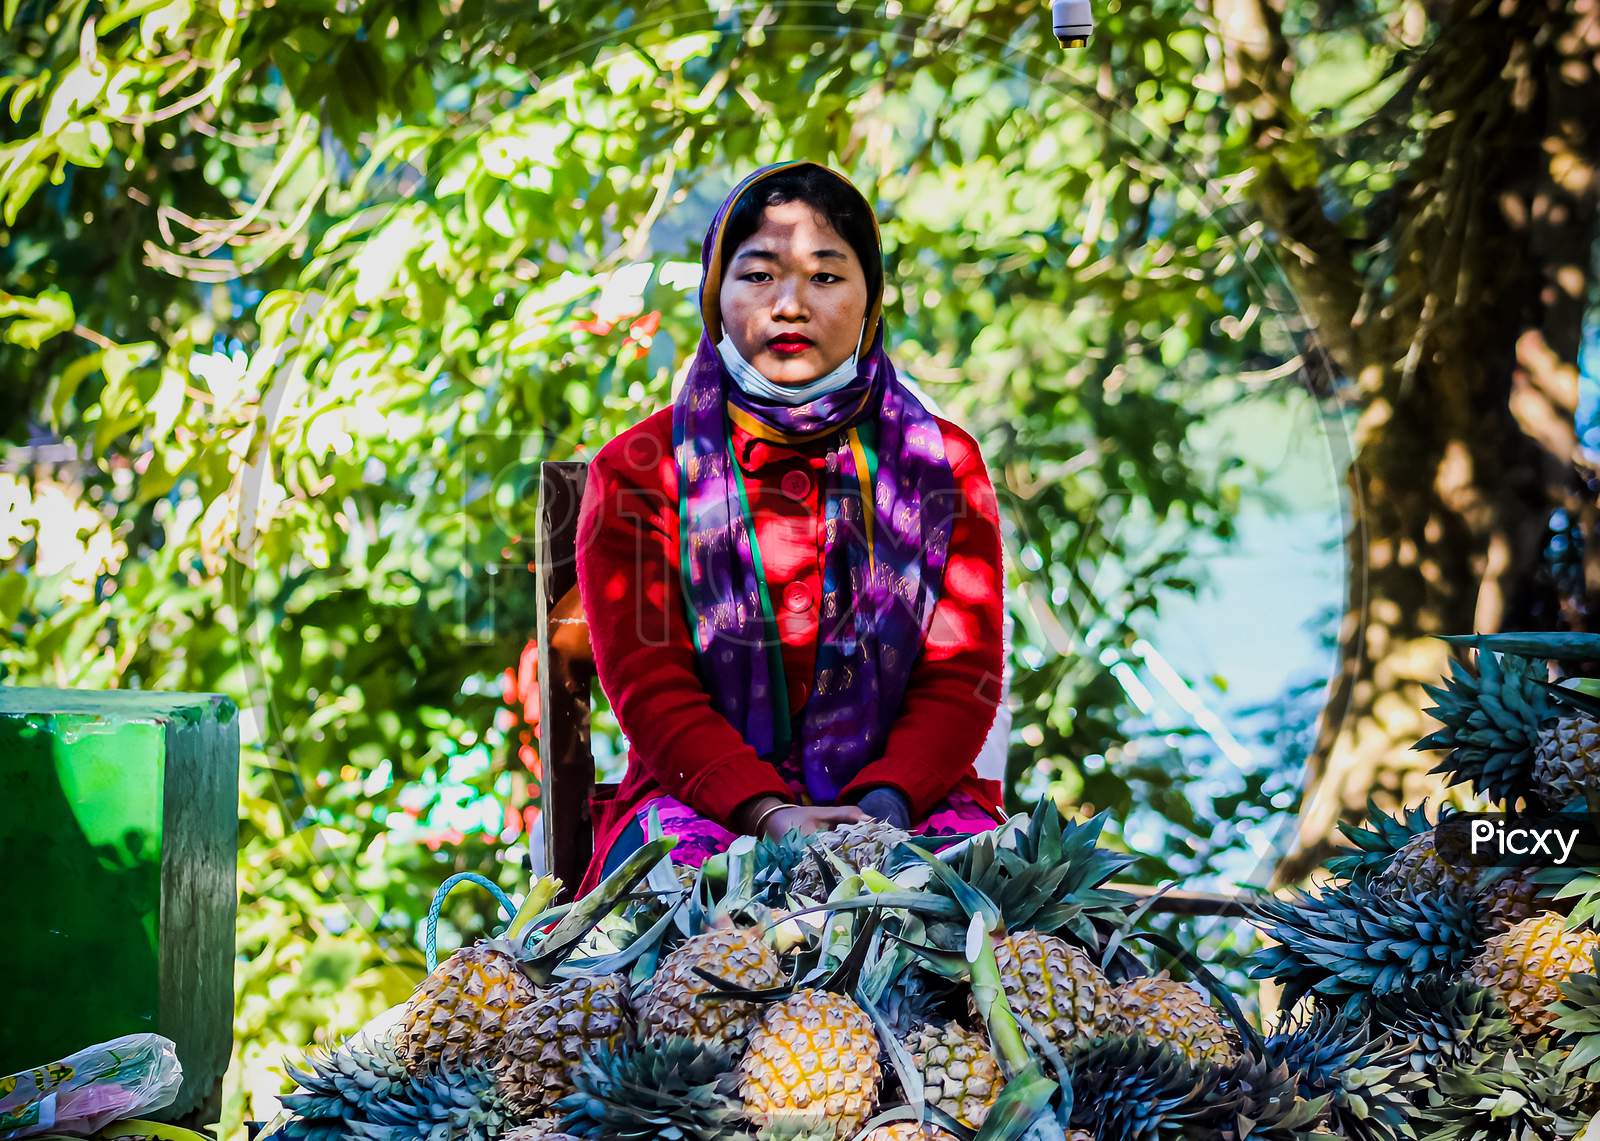 The girl is sitting on the side of the road selling pineapple. The girl is seen in a state of despair. The fruit seller on the side of the road is in a bad condition due to the effect of corona.